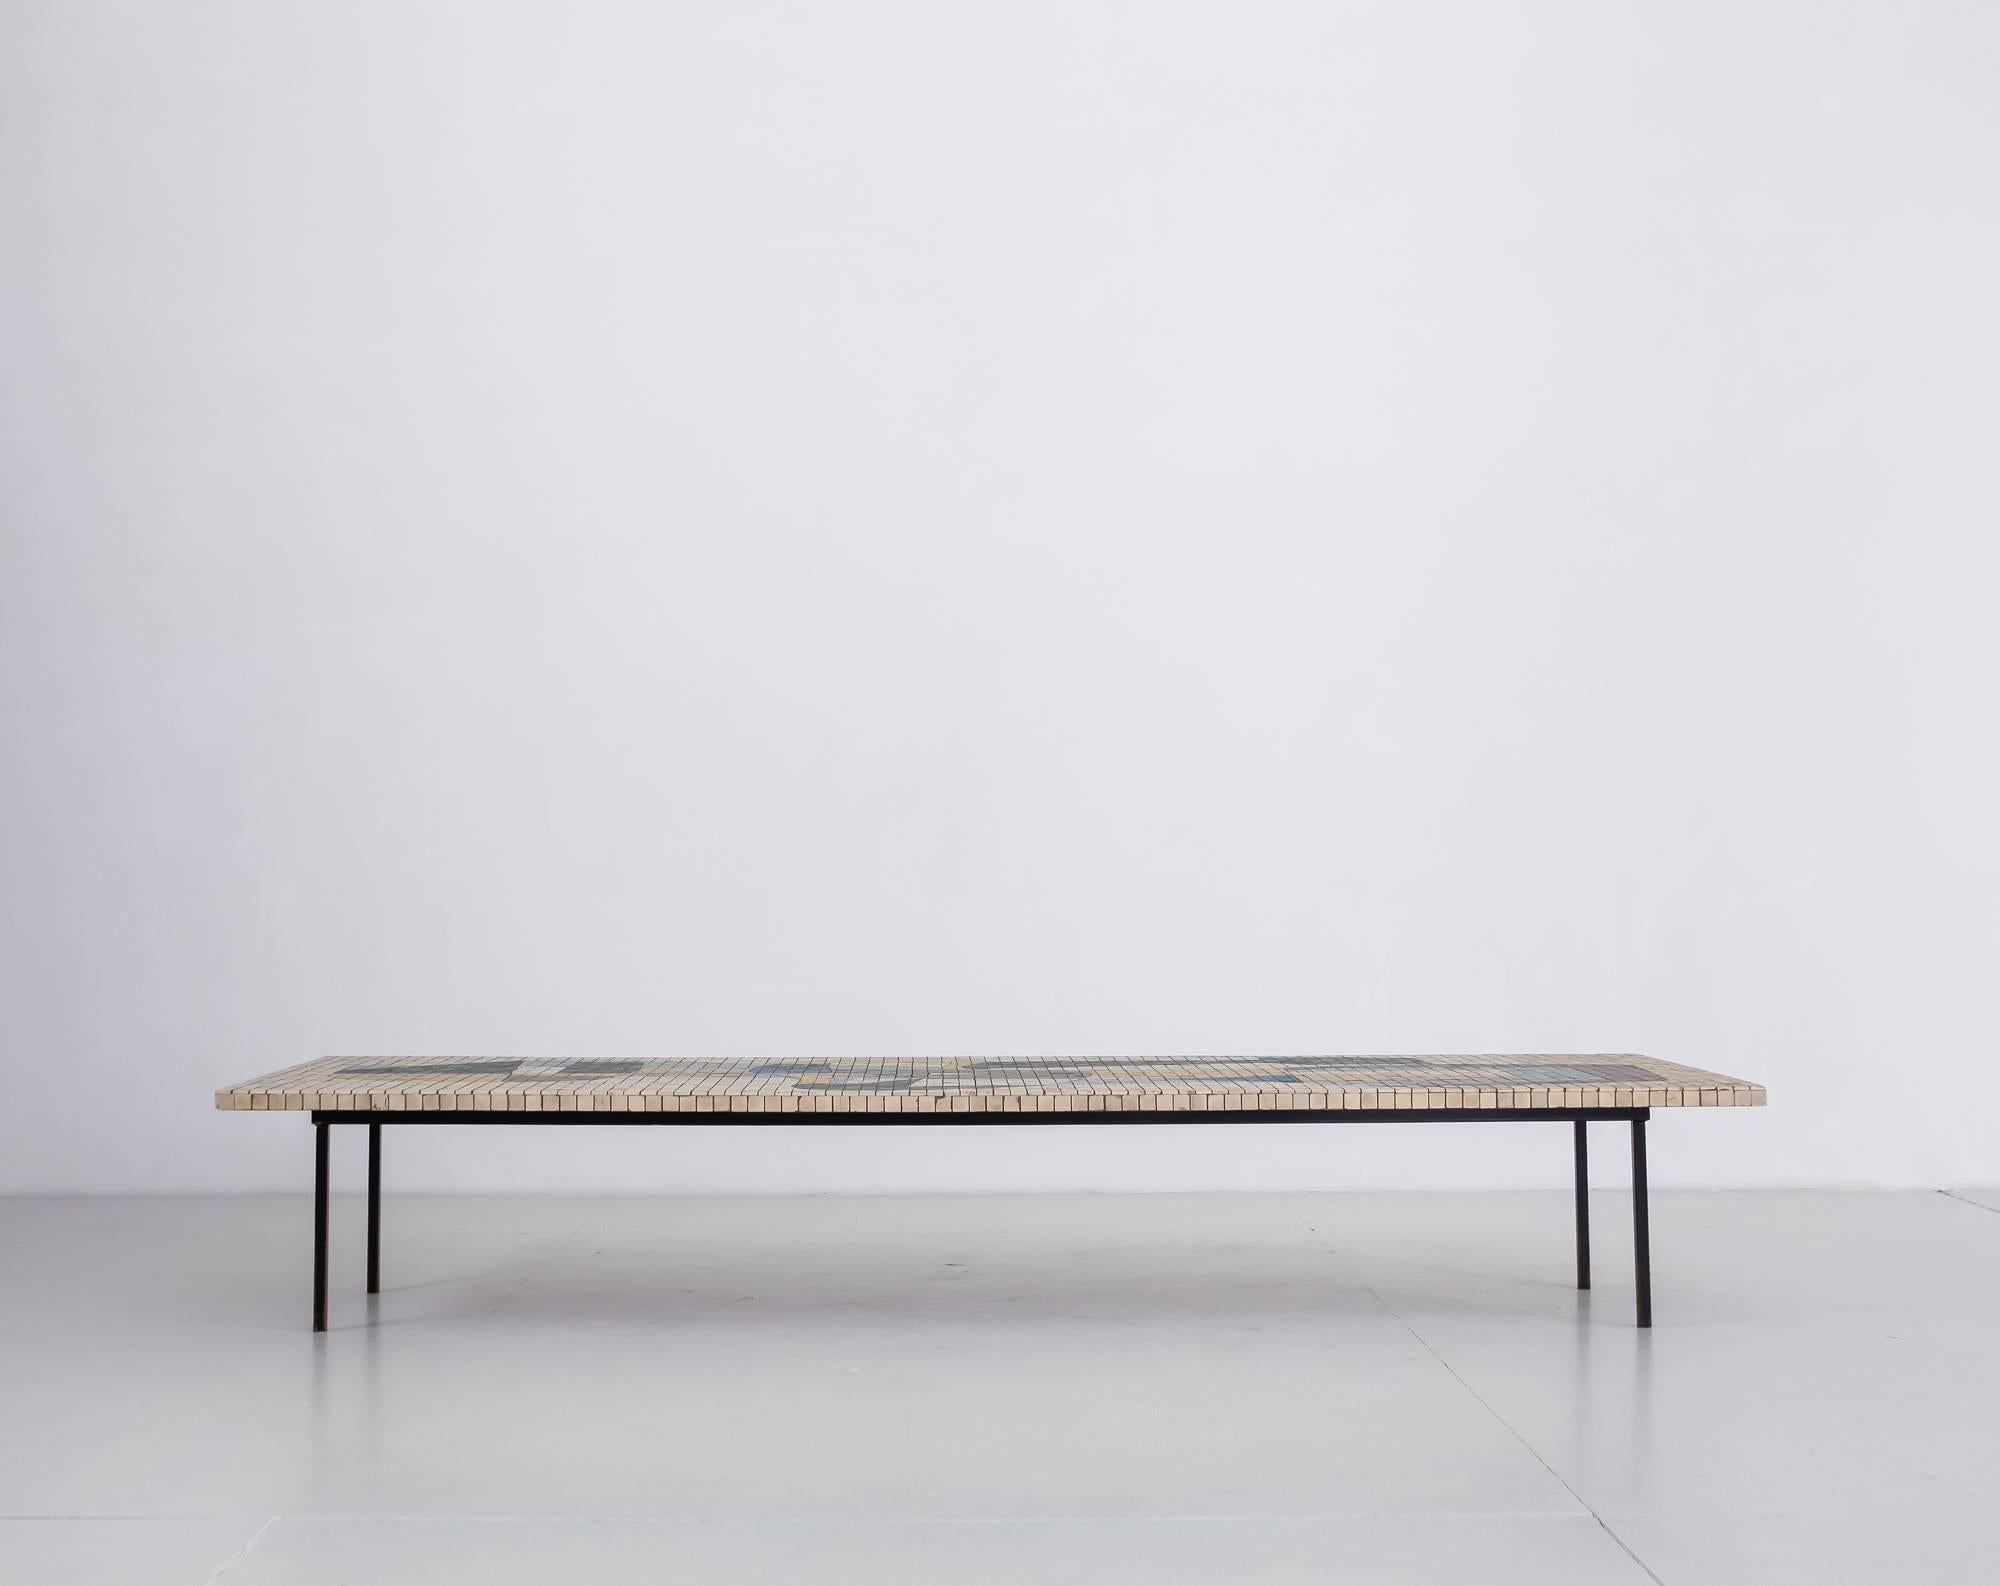 Ceramic Large Rectangular Coffee Table with Abstract Mosaic Tiles, Germany, 1950s